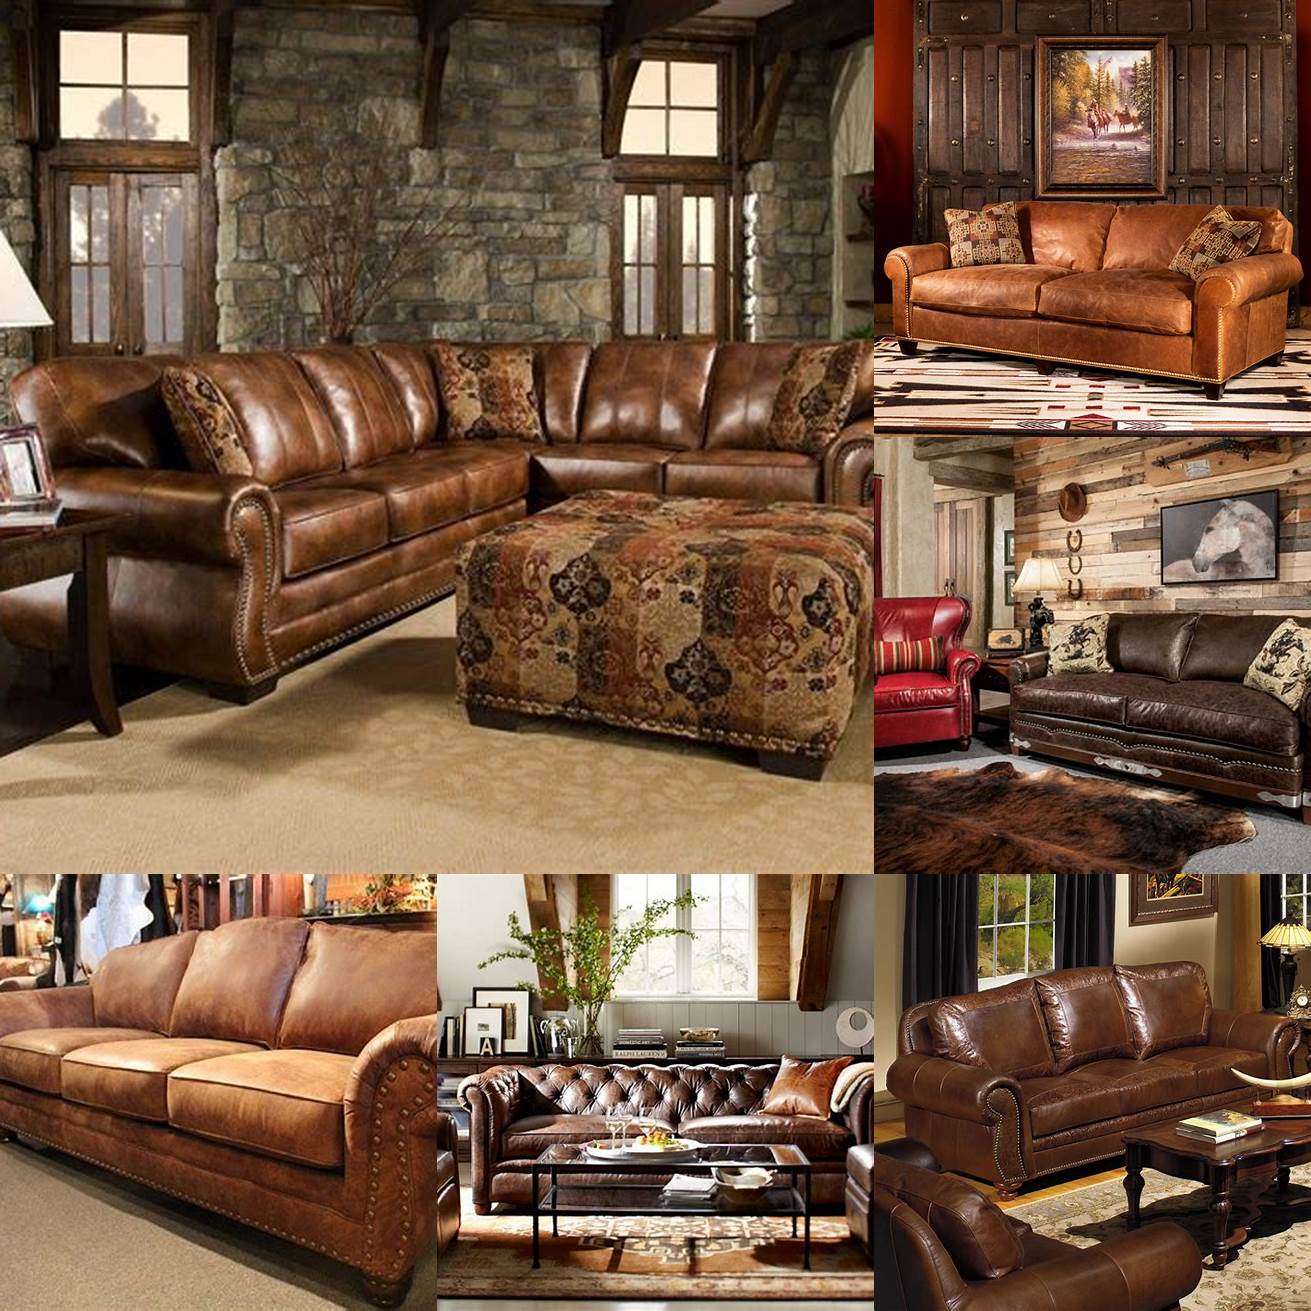 A distressed leather sofa in a rustic living room